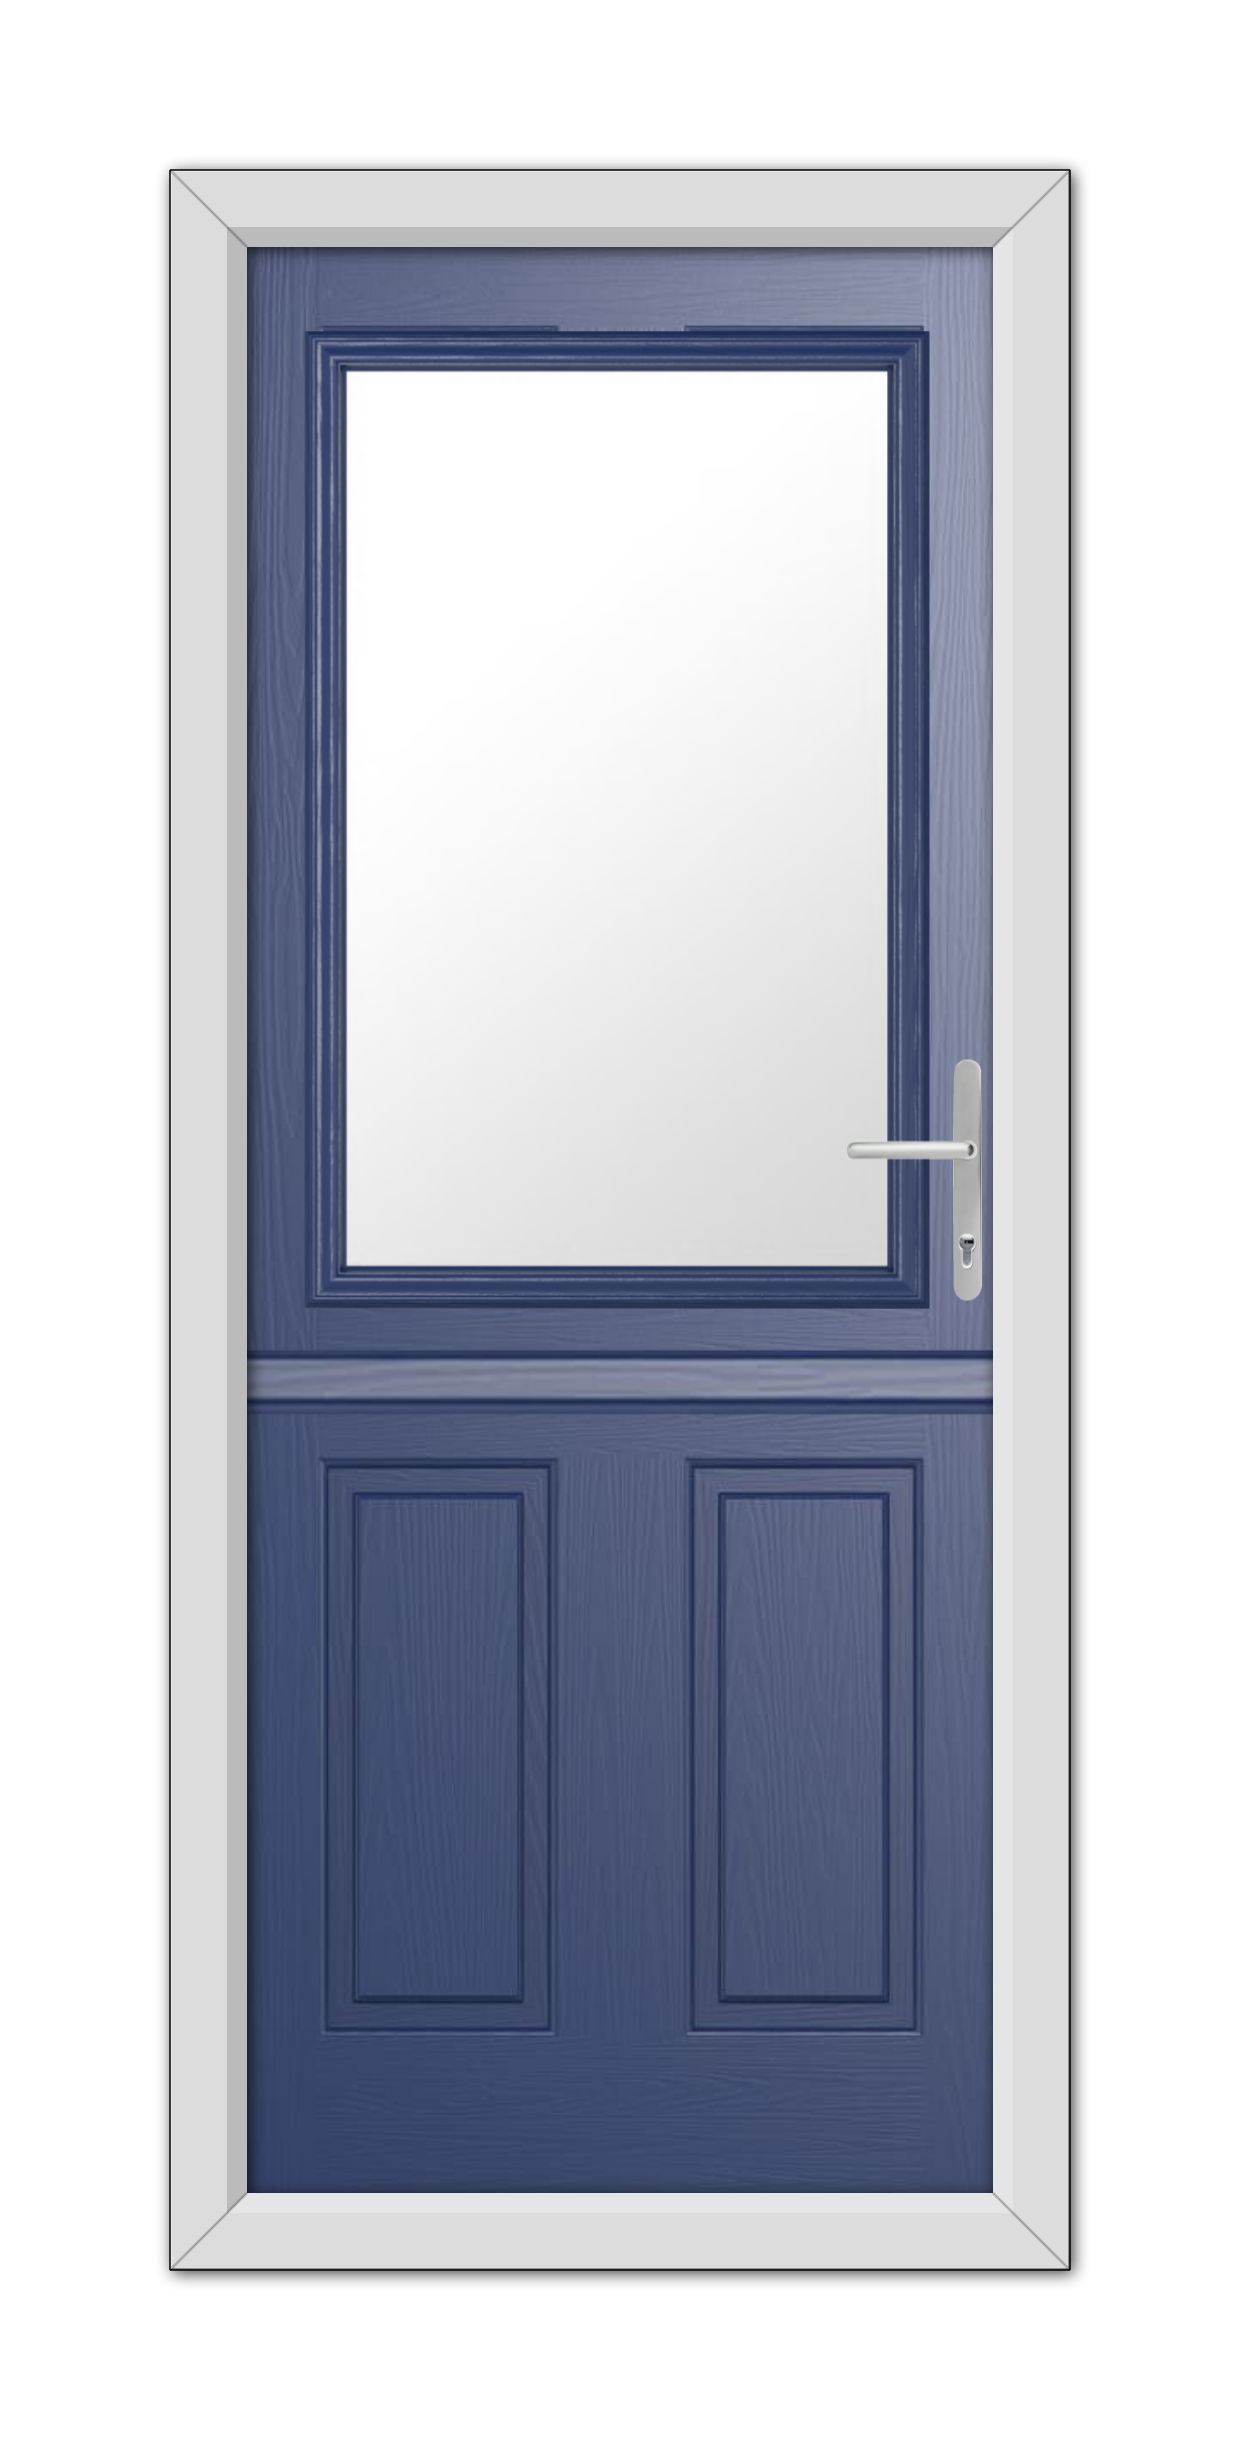 A Blue Buxton Stable Composite Door 48mm Timber Core with a white frame, featuring a large square window at the top and a metallic handle on the right.